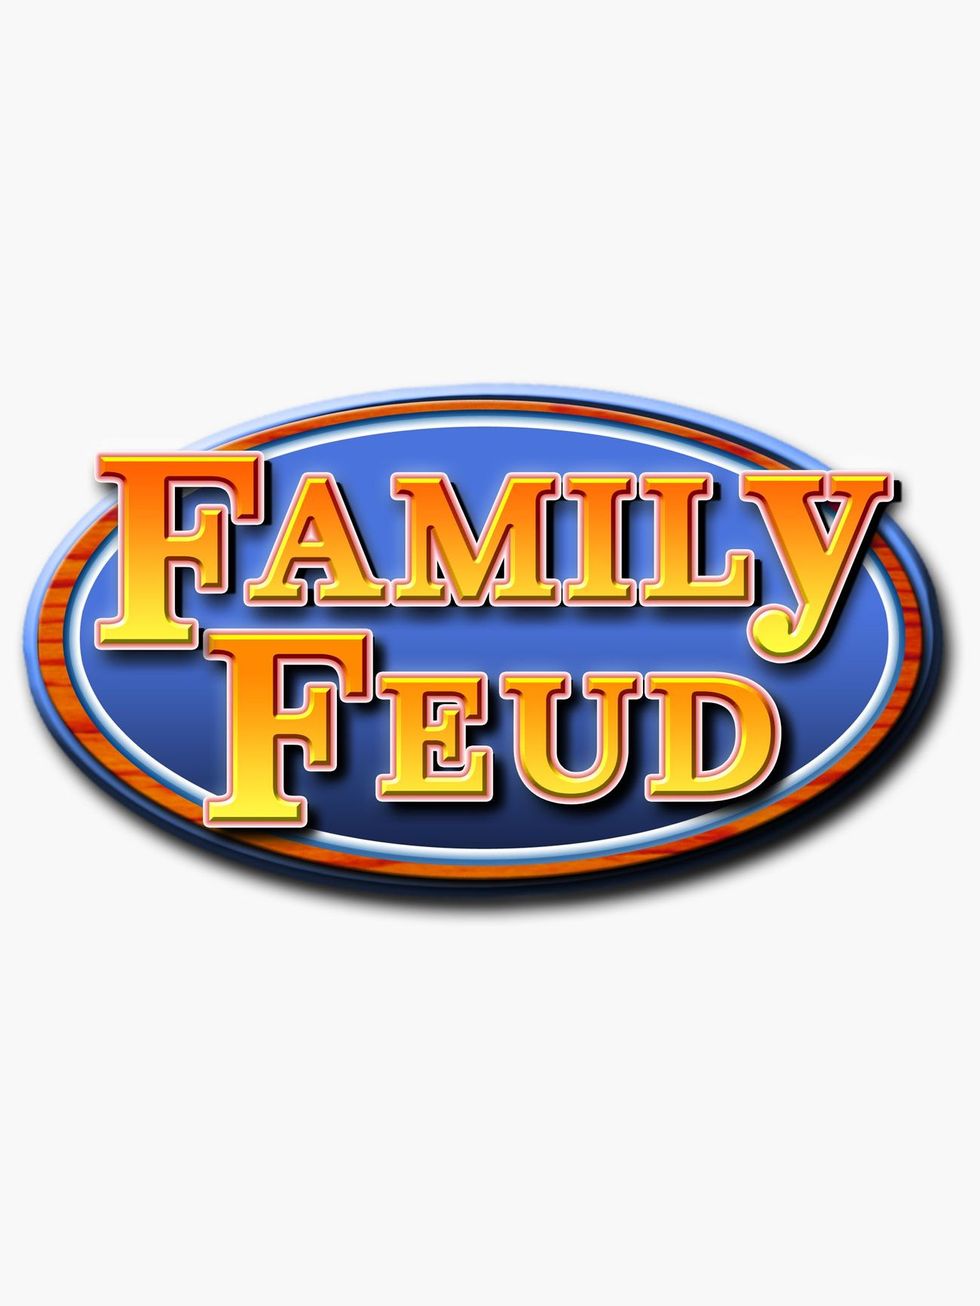 Survey Says: 10 of the Funniest Family Feud Moments